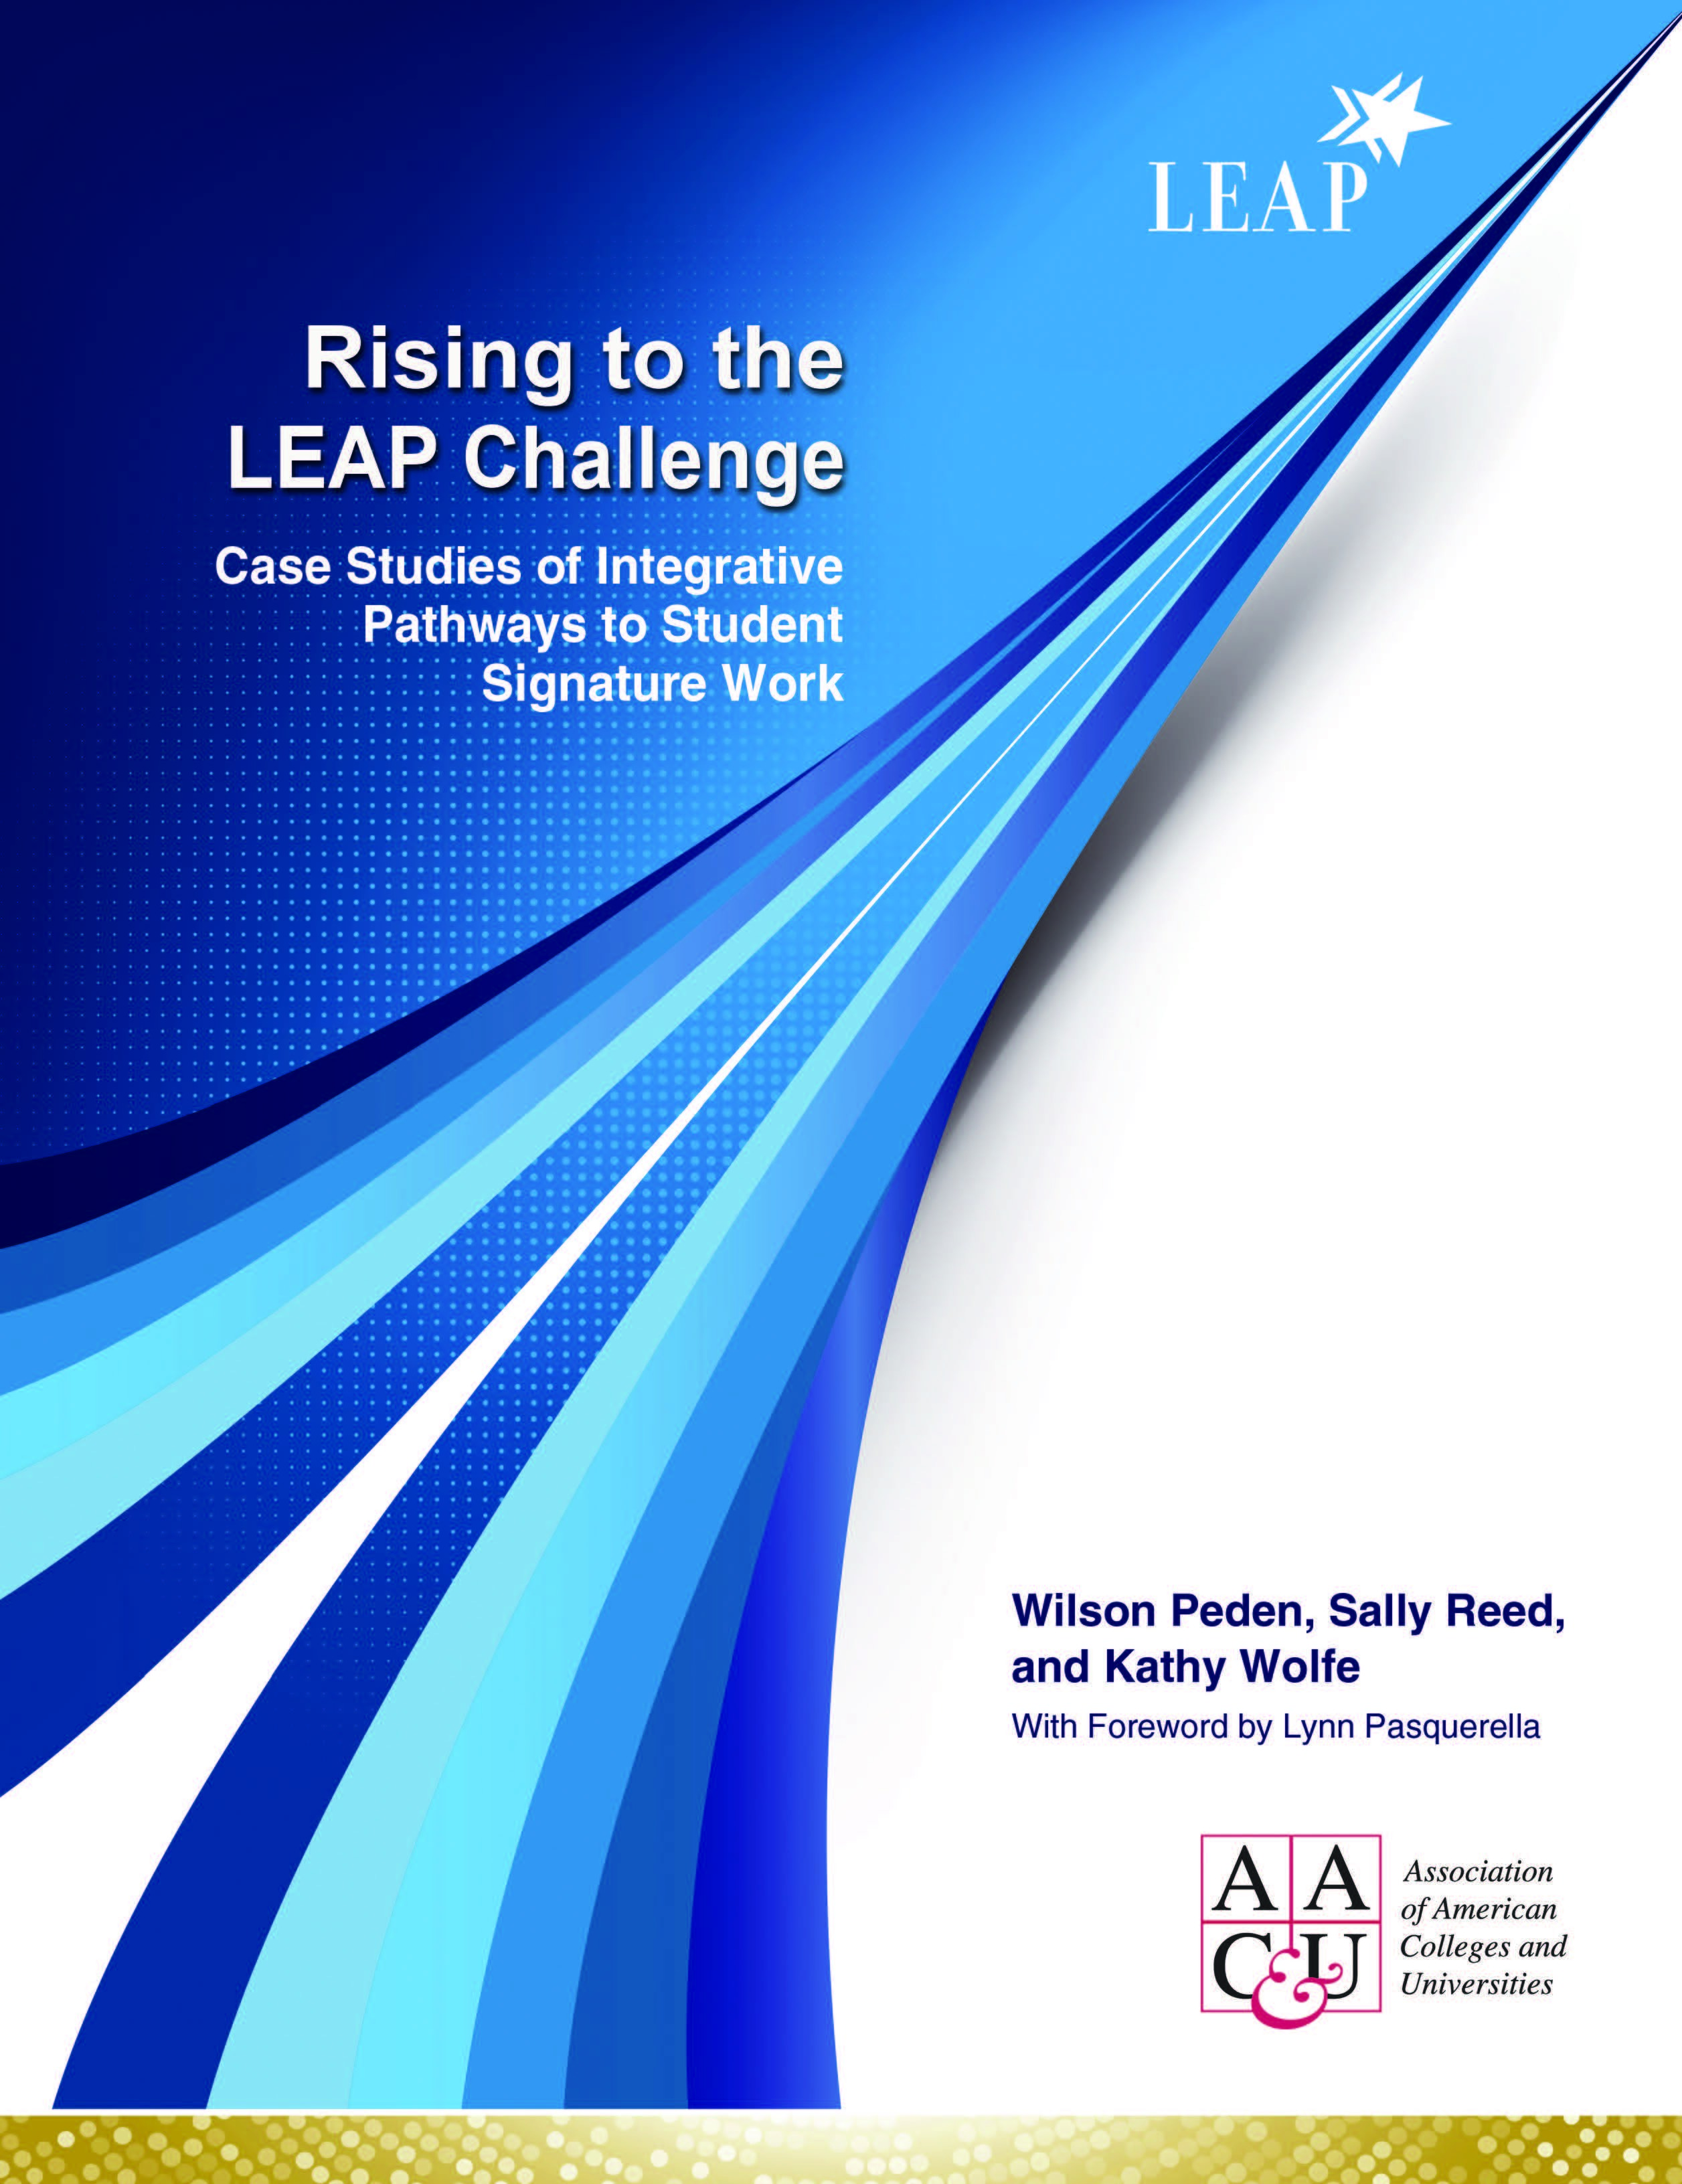 The cover for "Rising to the LEAP Challenge: Case studies of integrative pathways to student signature work" by Wilson Peden, Sally Reed, and Kathy Wolfe.